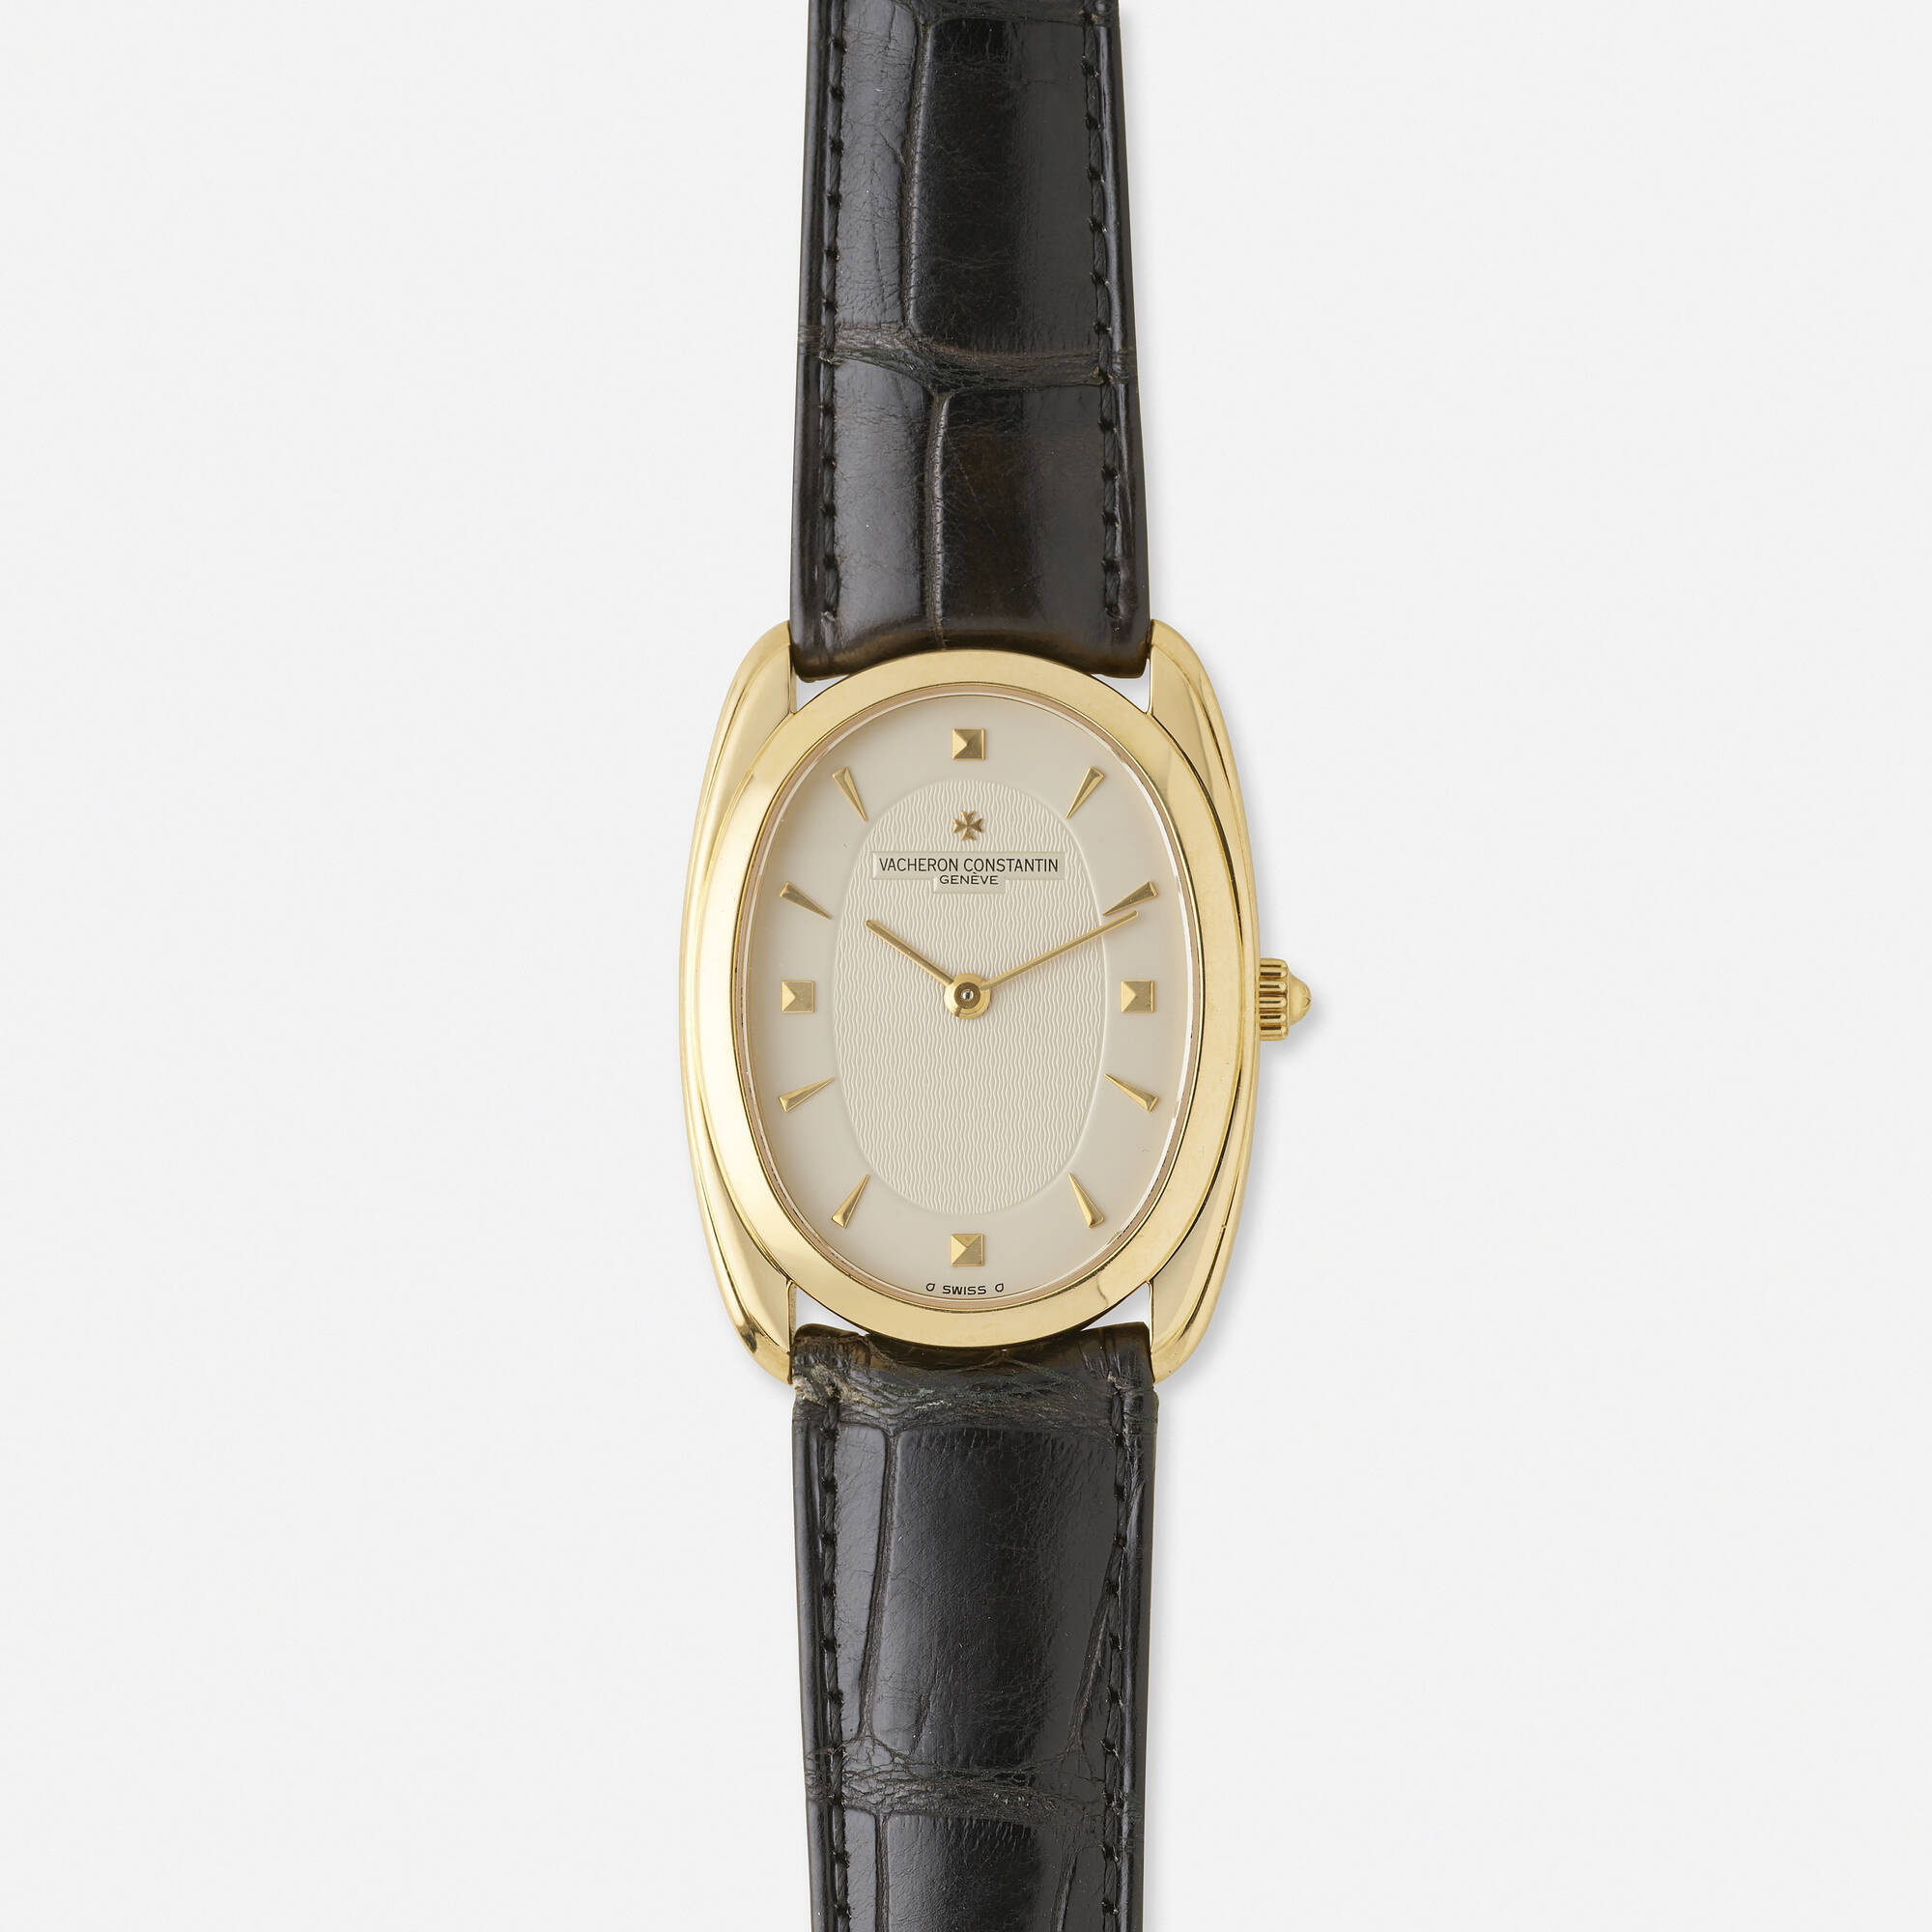 459: VACHERON CONSTANTIN, 'Les Historiques' gold and leather wristwatch,  Ref. 31110/000J < Watches: A Prominent Store Collection, 30 September 2021  < Auctions | Rago Auctions